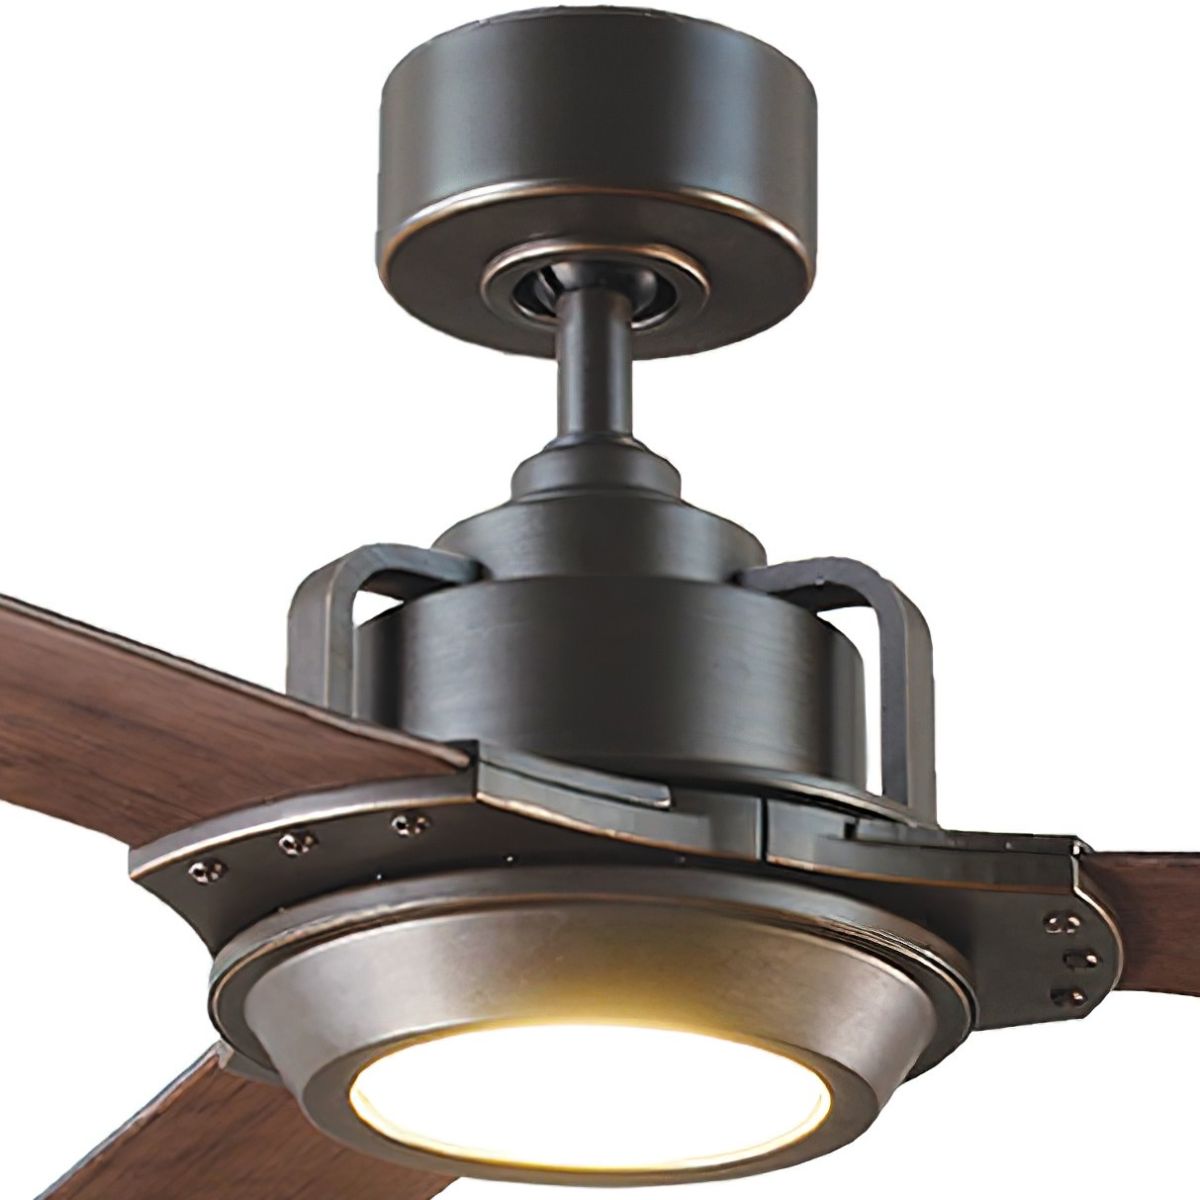 Osprey 56 Inch Farmhouse Outdoor Smart Ceiling Fan With 2700K Light And Remote